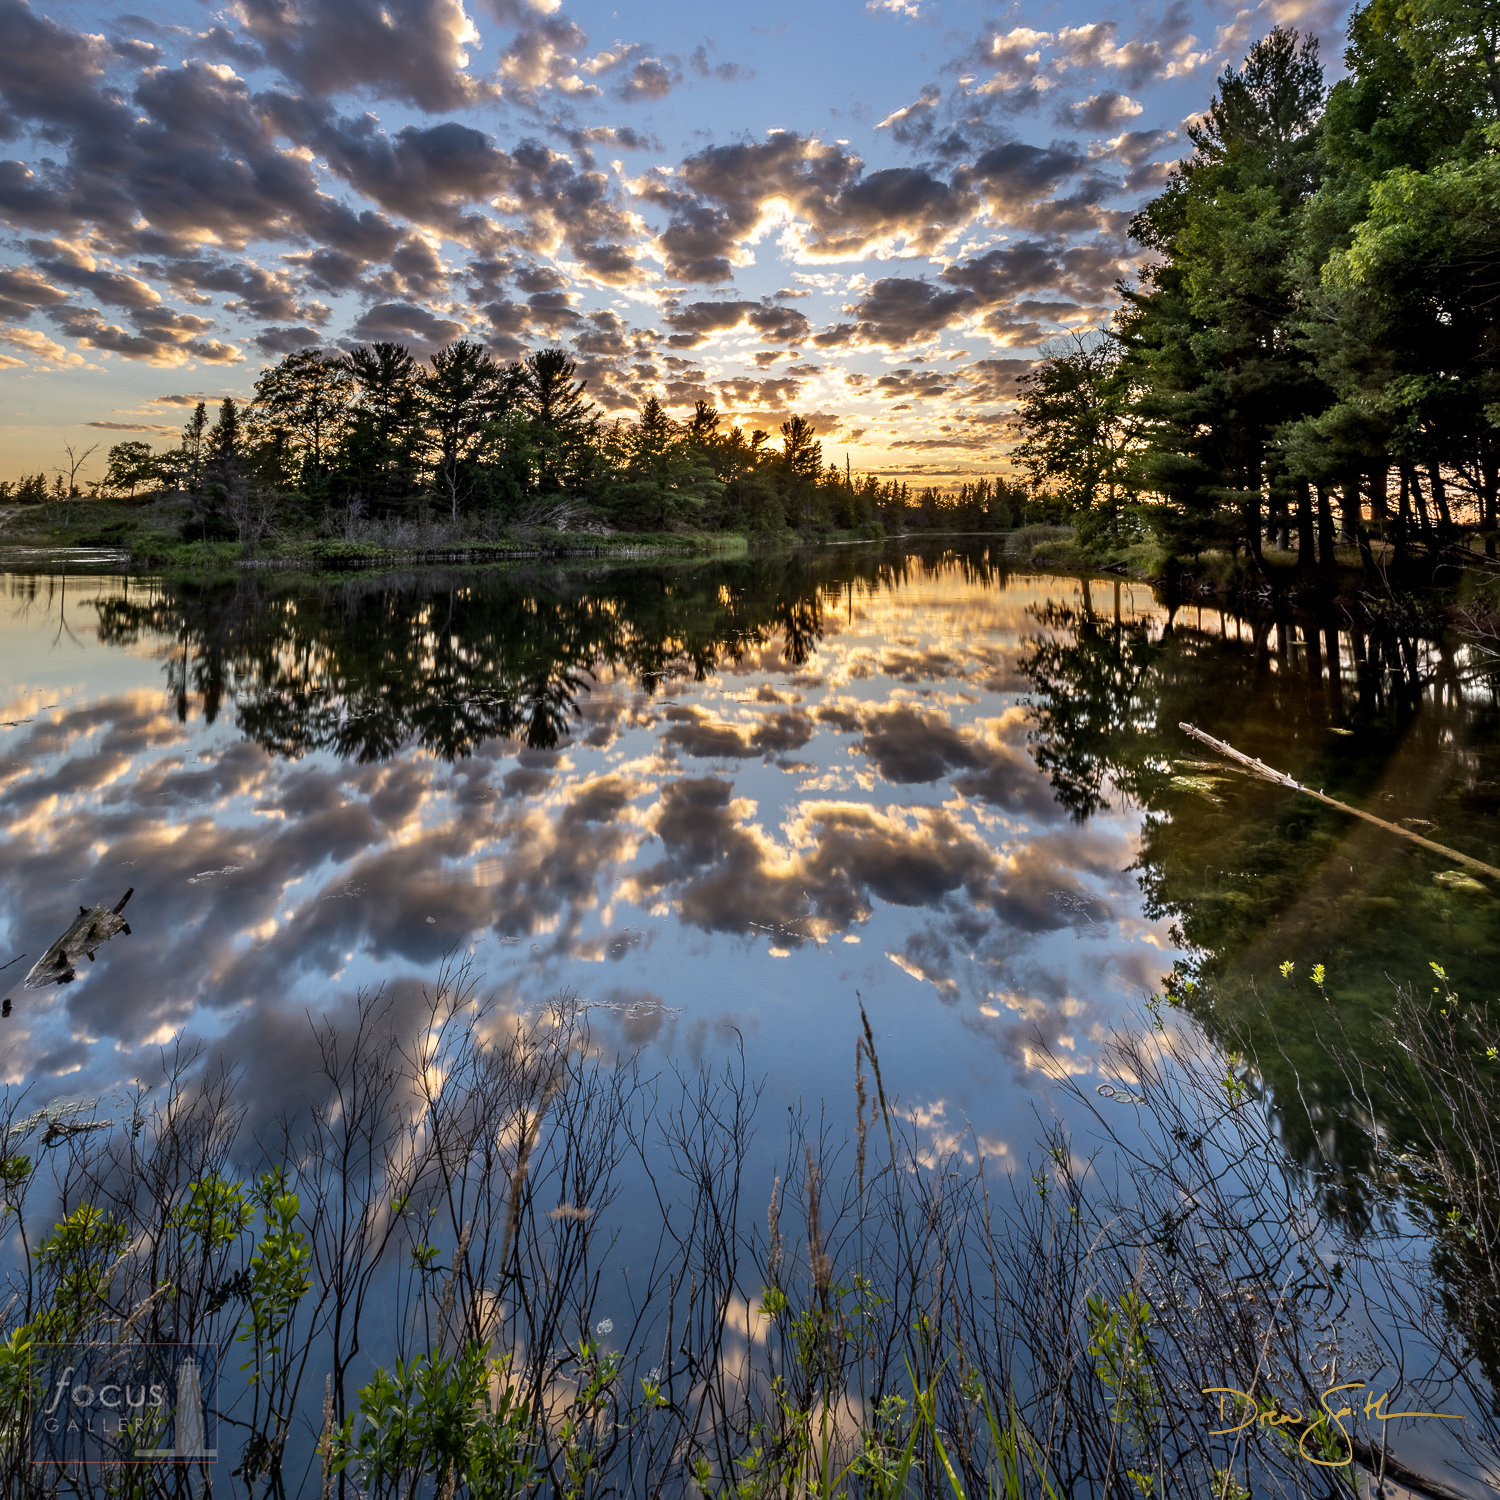 SLBE_Platte_River_Point_dsmith_220721_7930-HDR Please use the "Email Focus Gallery" link below for information on available sizes...